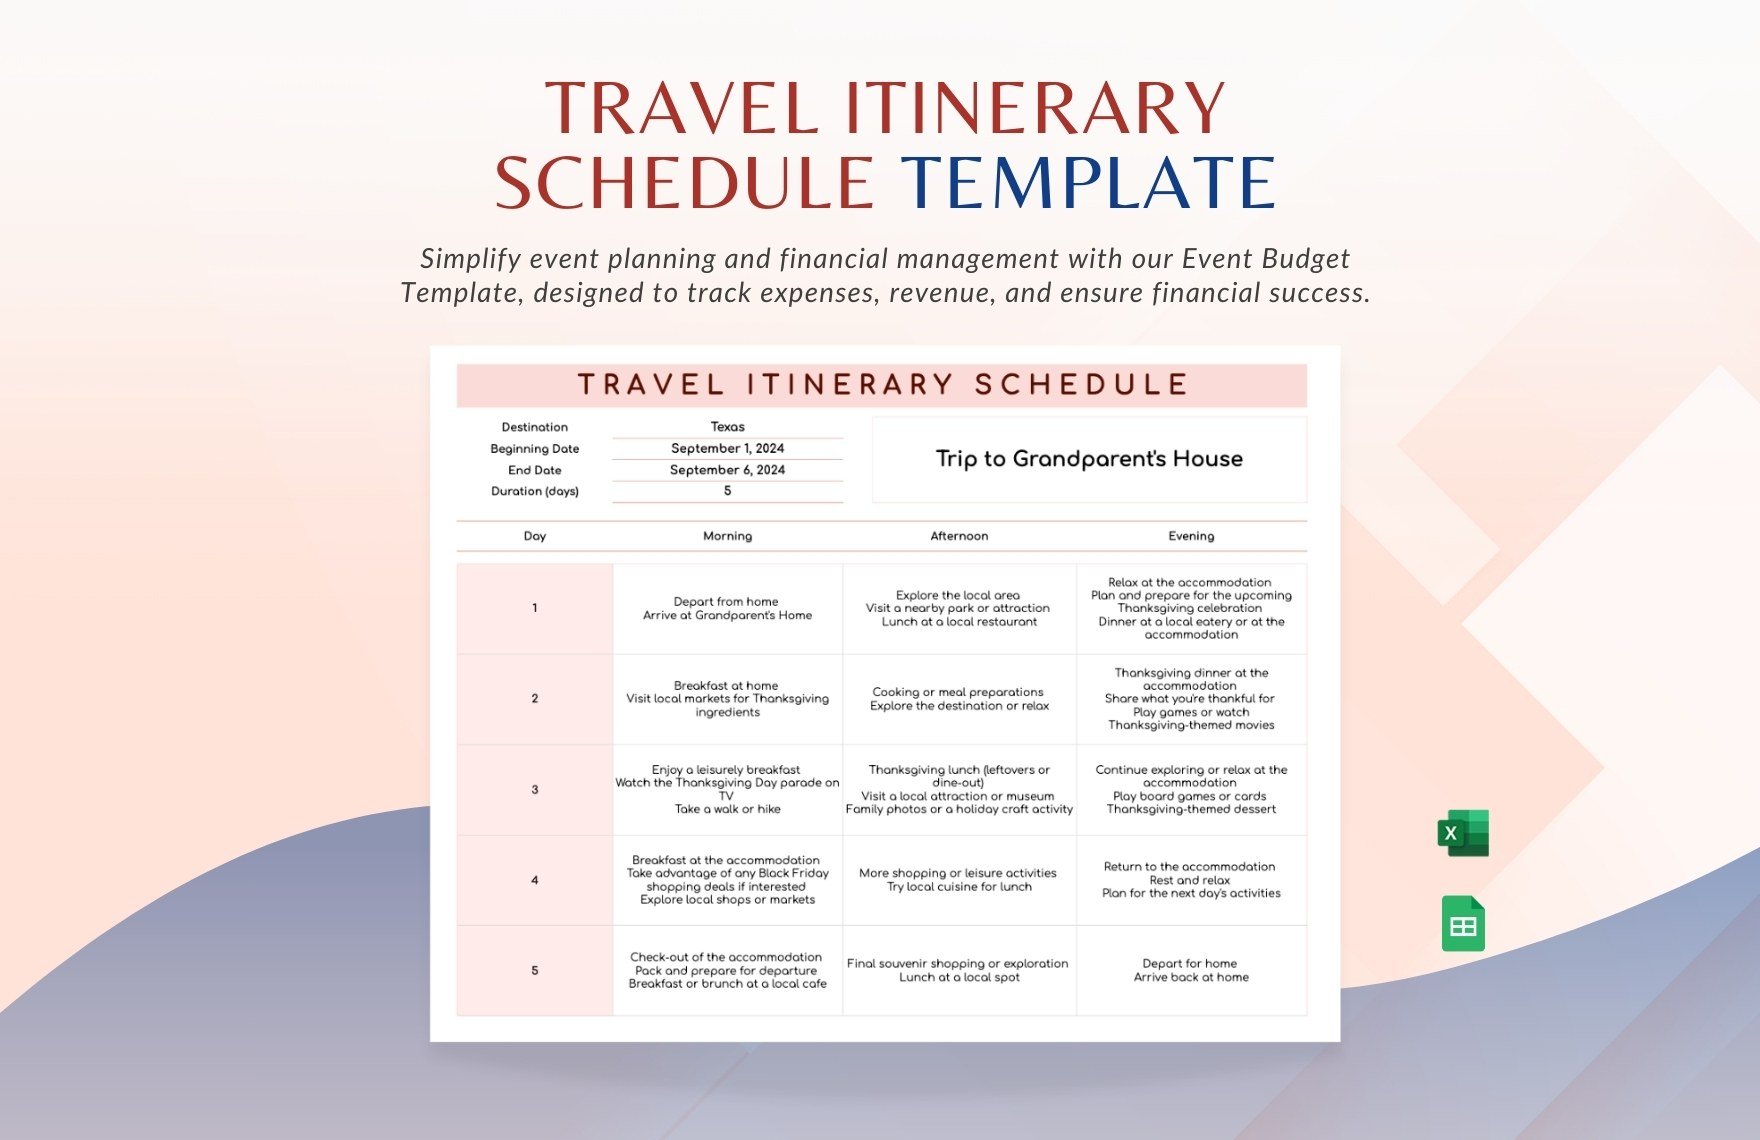 Travel Itinerary Schedule Template in Excel, Google Sheets